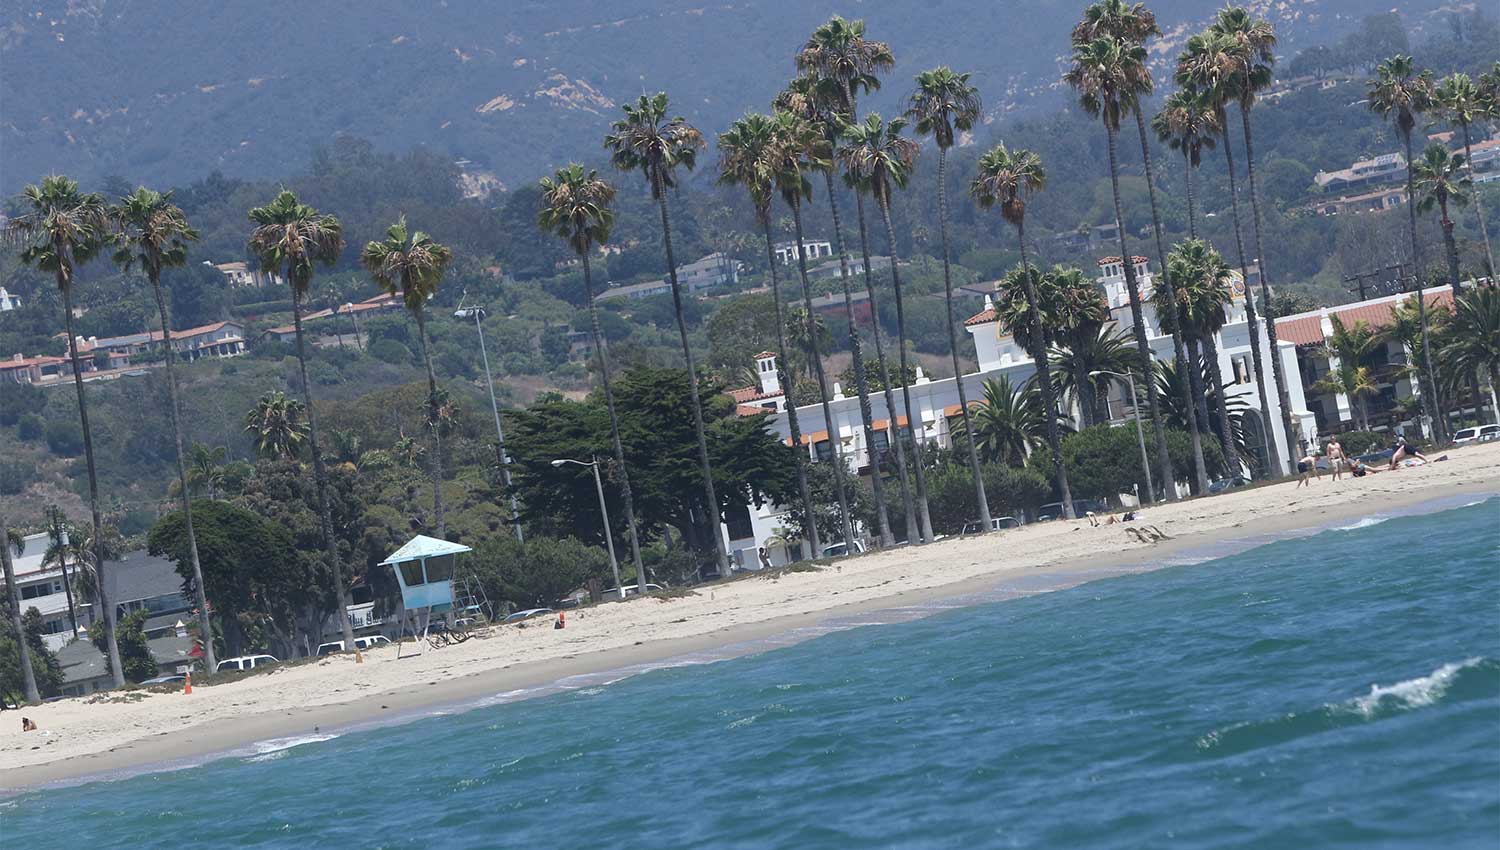 View of East Beach Santa Barbara from the water